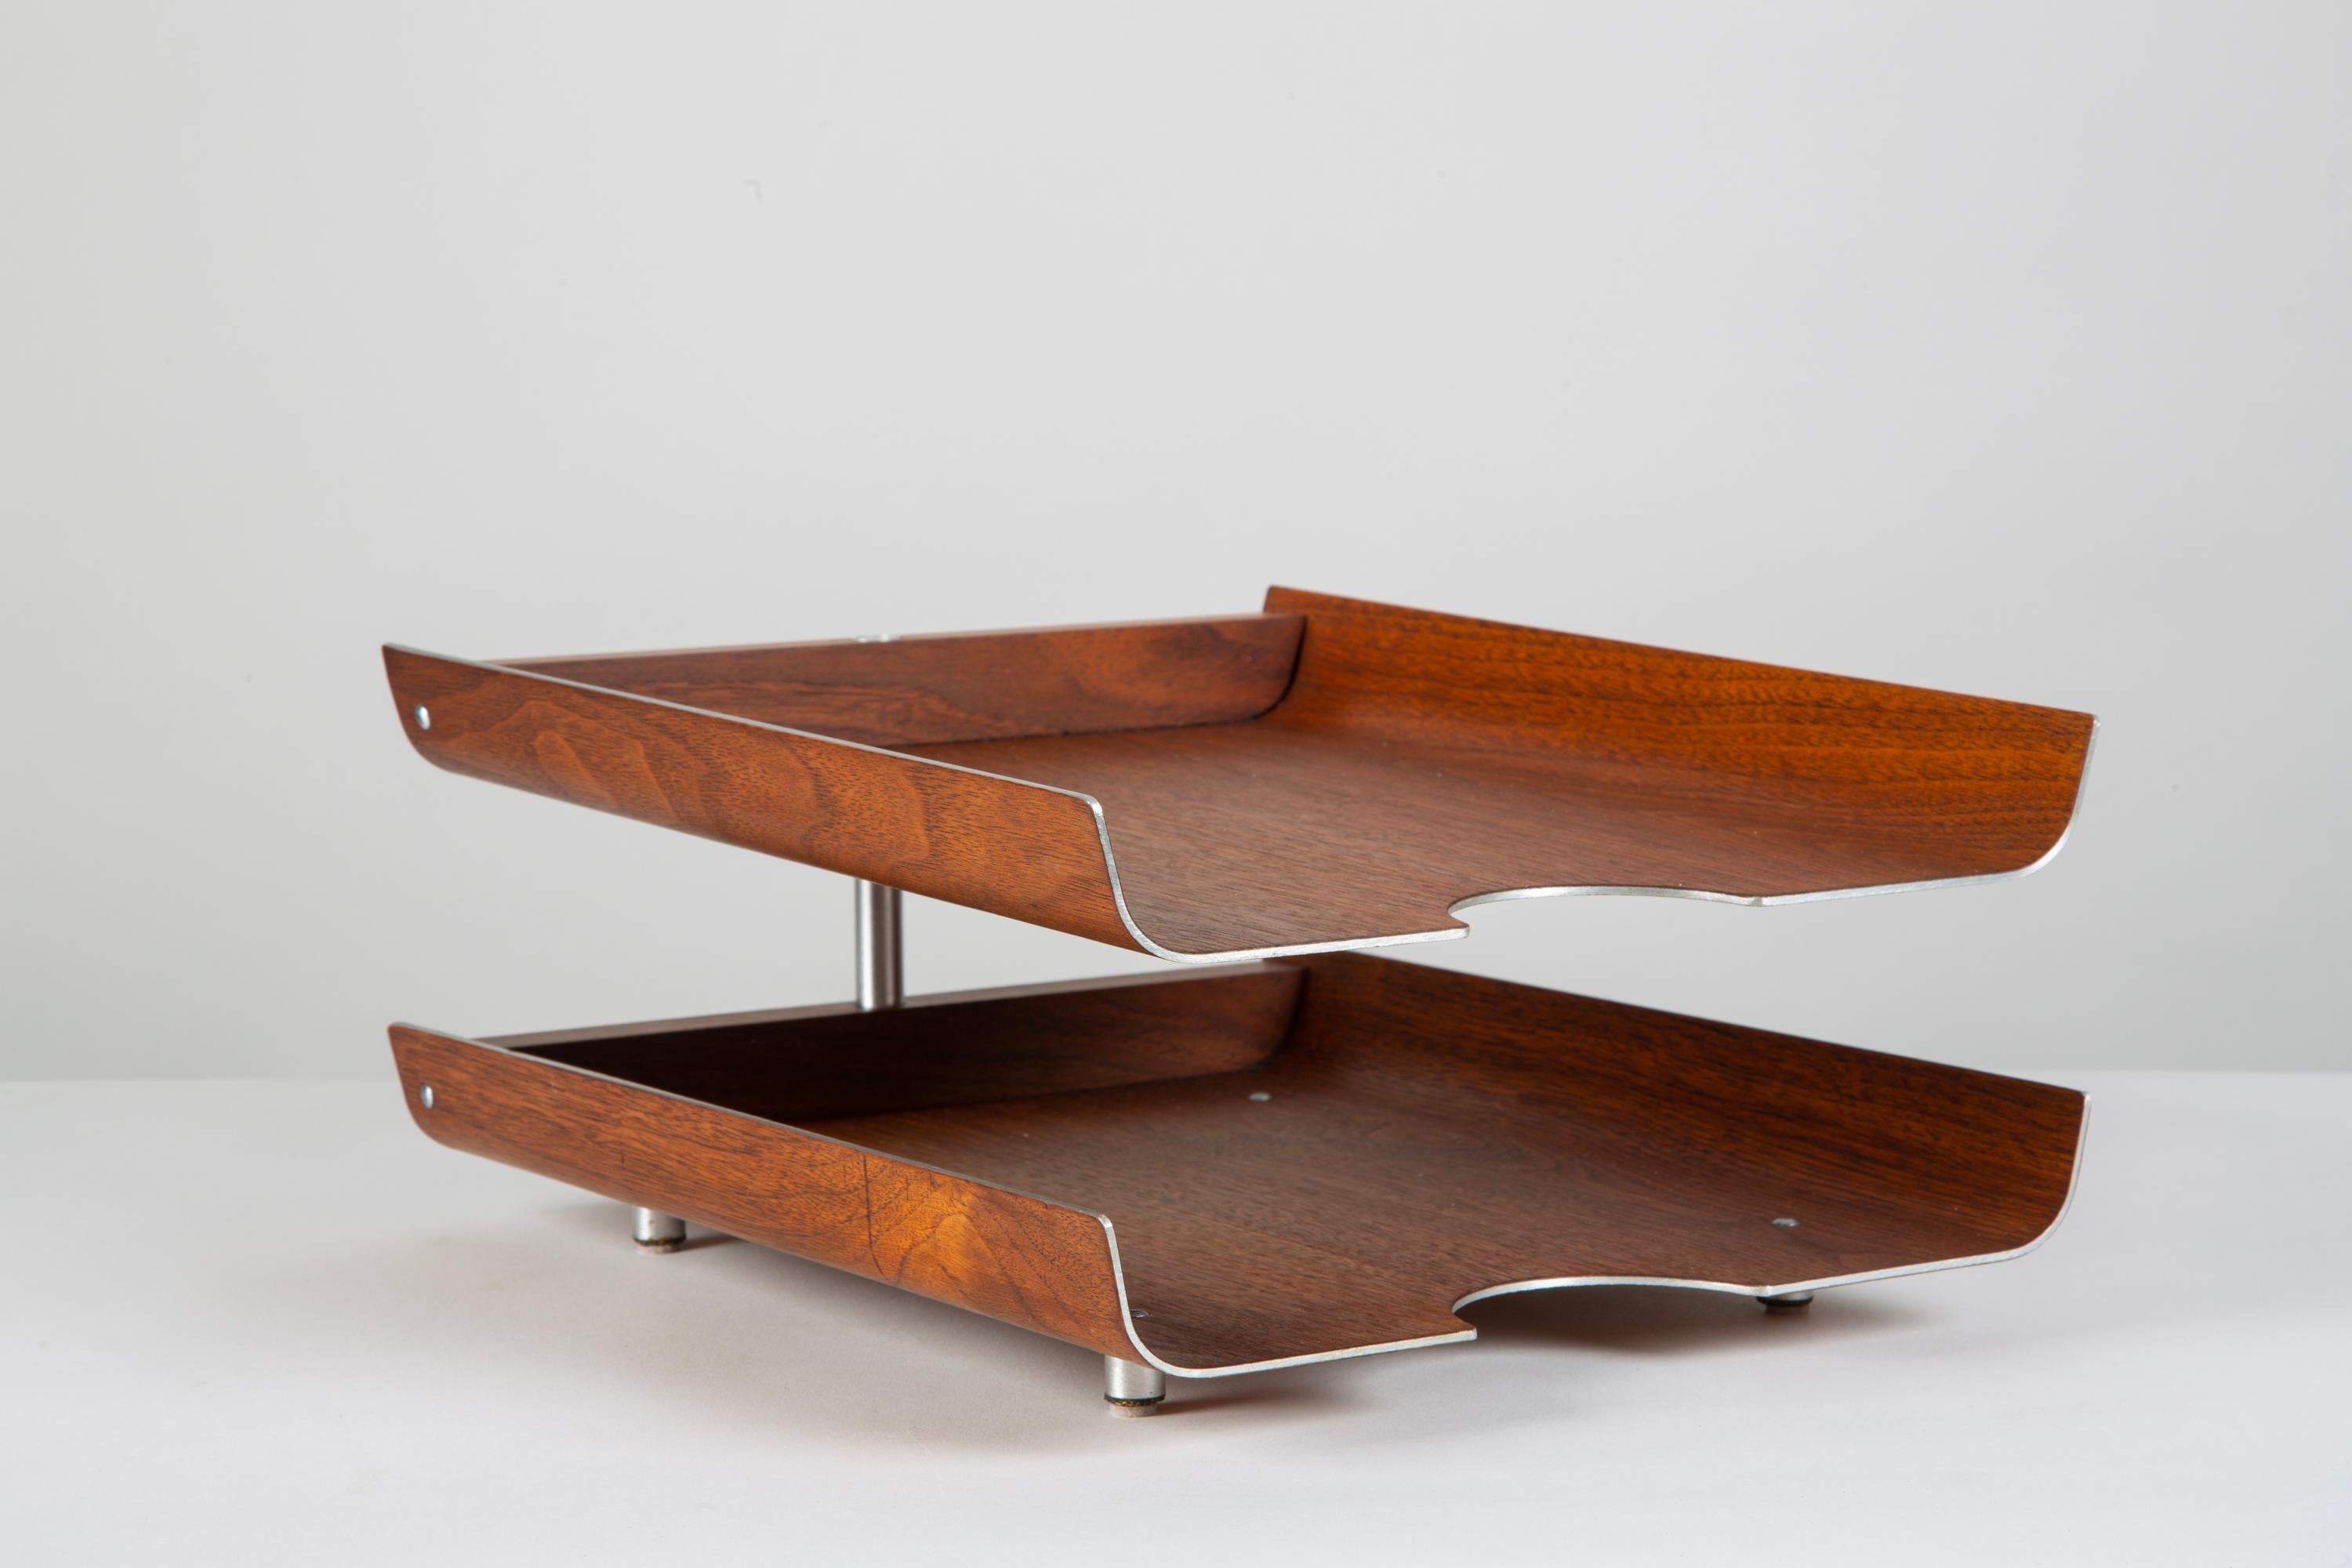 The 1950s in/out tray for office or study has two tiers, in original bent teak plywood with an aluminum core. The trays rotate around a central post of brushed steel.

Tray bottoms retain the original manufacturer’s label.

Dimensions: 10